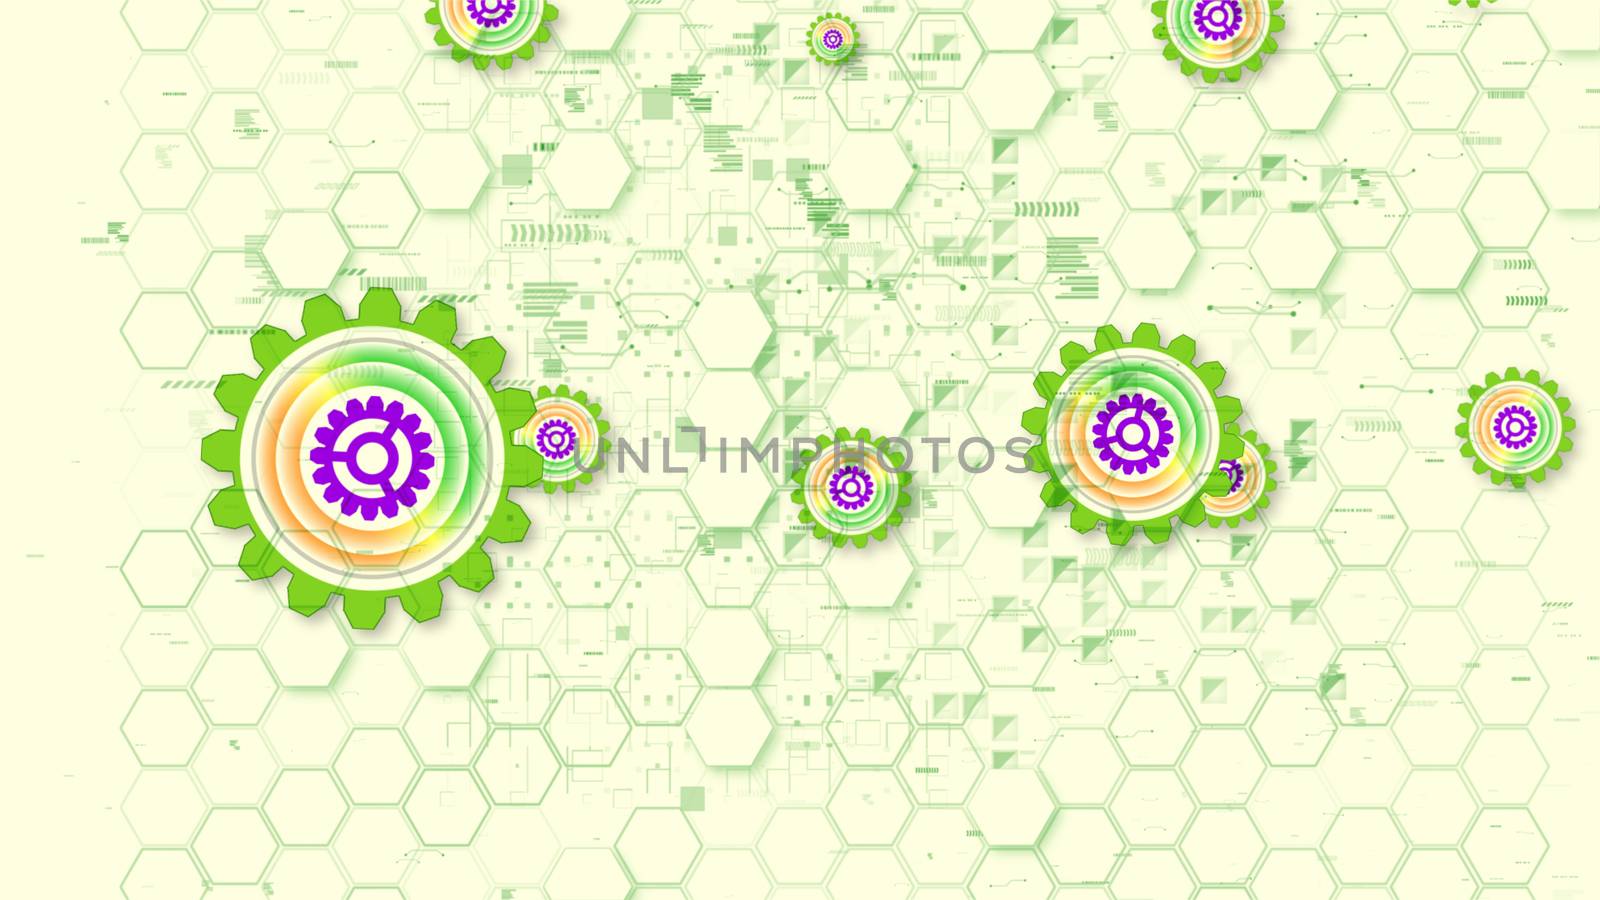 Cheerful 3d illustration of multishaped cyber security gear wheels of light green, yellow and violet colors in the white background. They shape the mood of optimism.